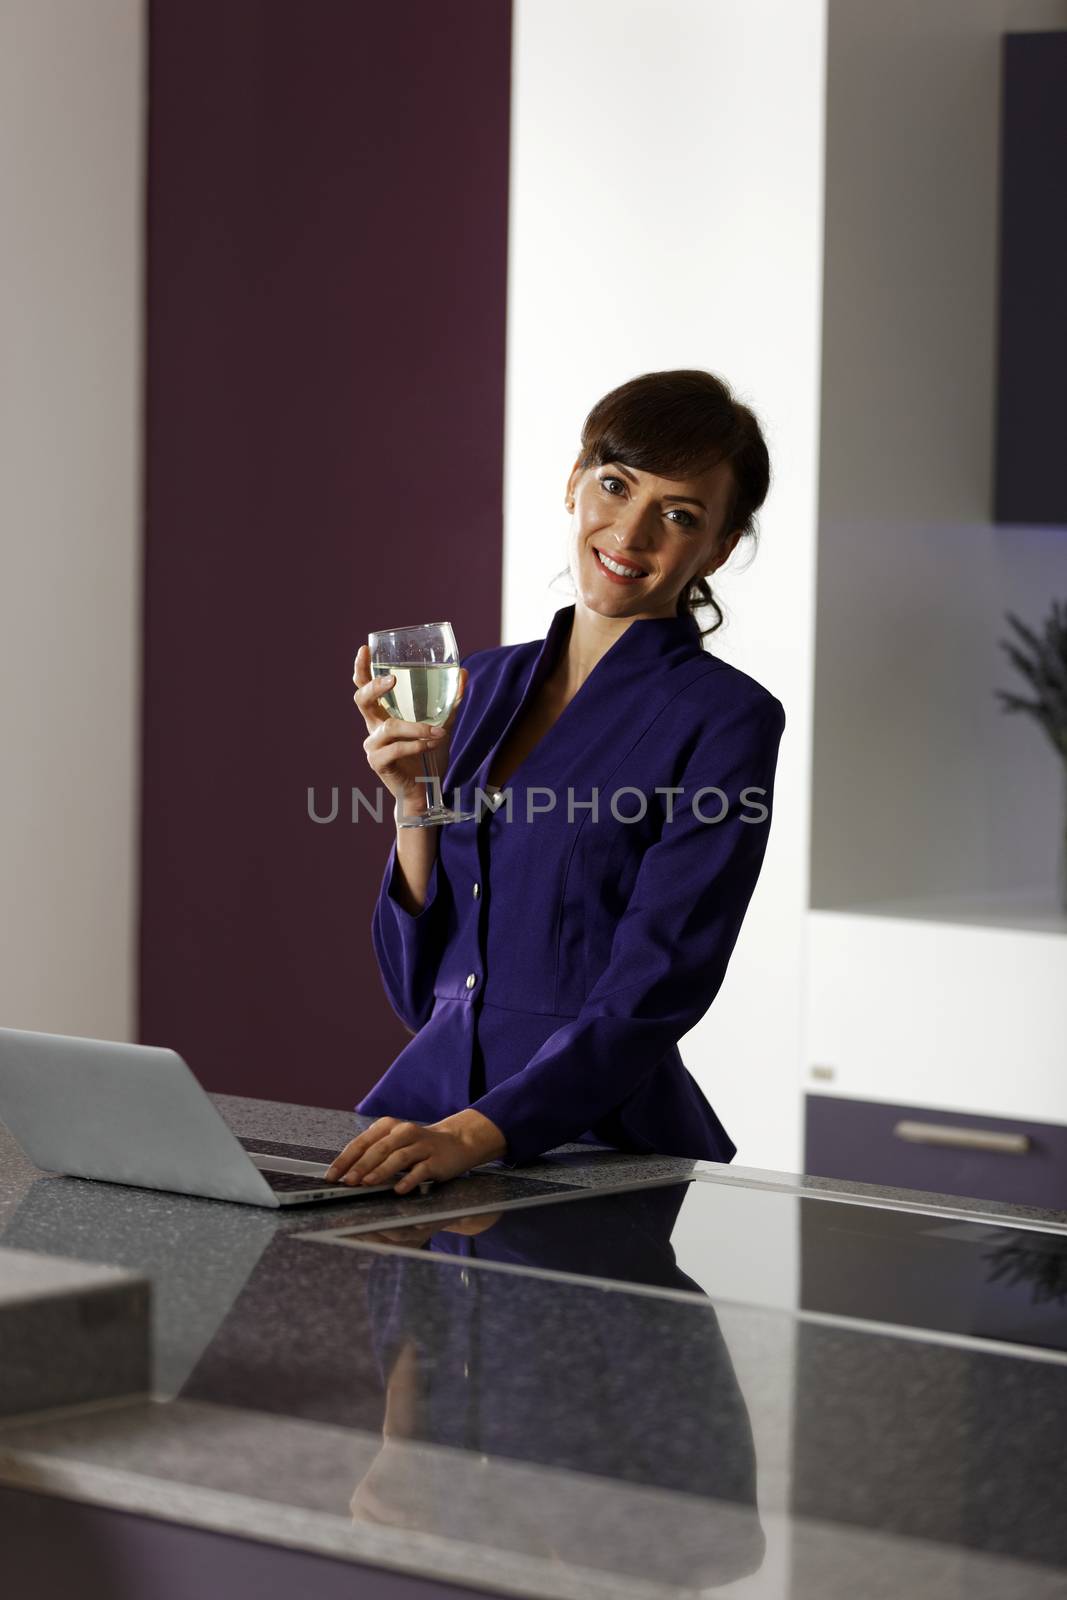 Smart business woman working on her laptop at home in kitchen.